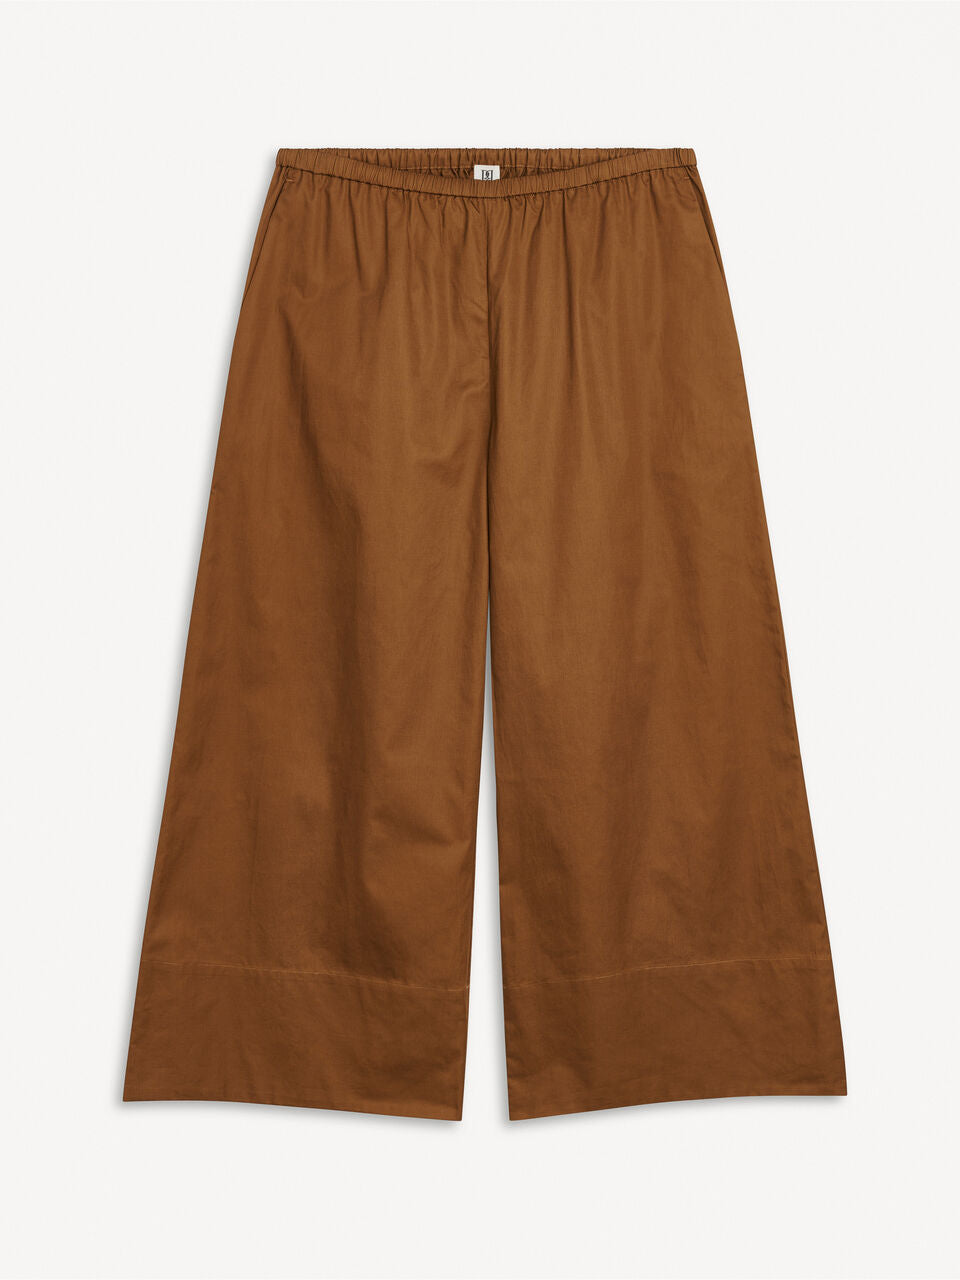 Luisa high-waisted trousers: Bison